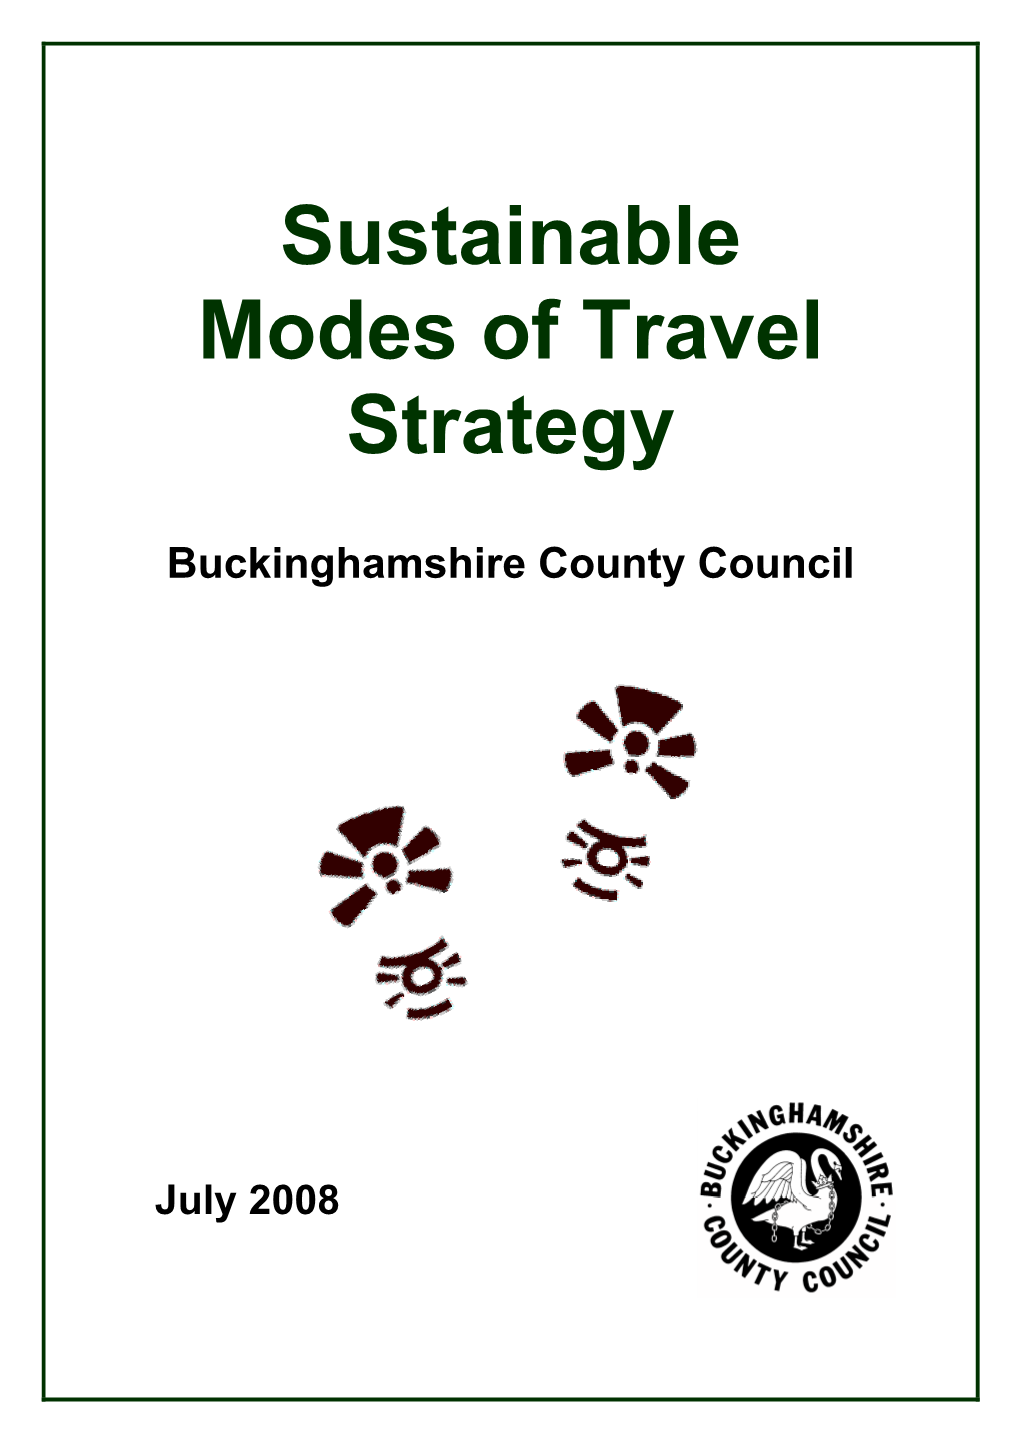 Sustainable Modes of Travel Strategy